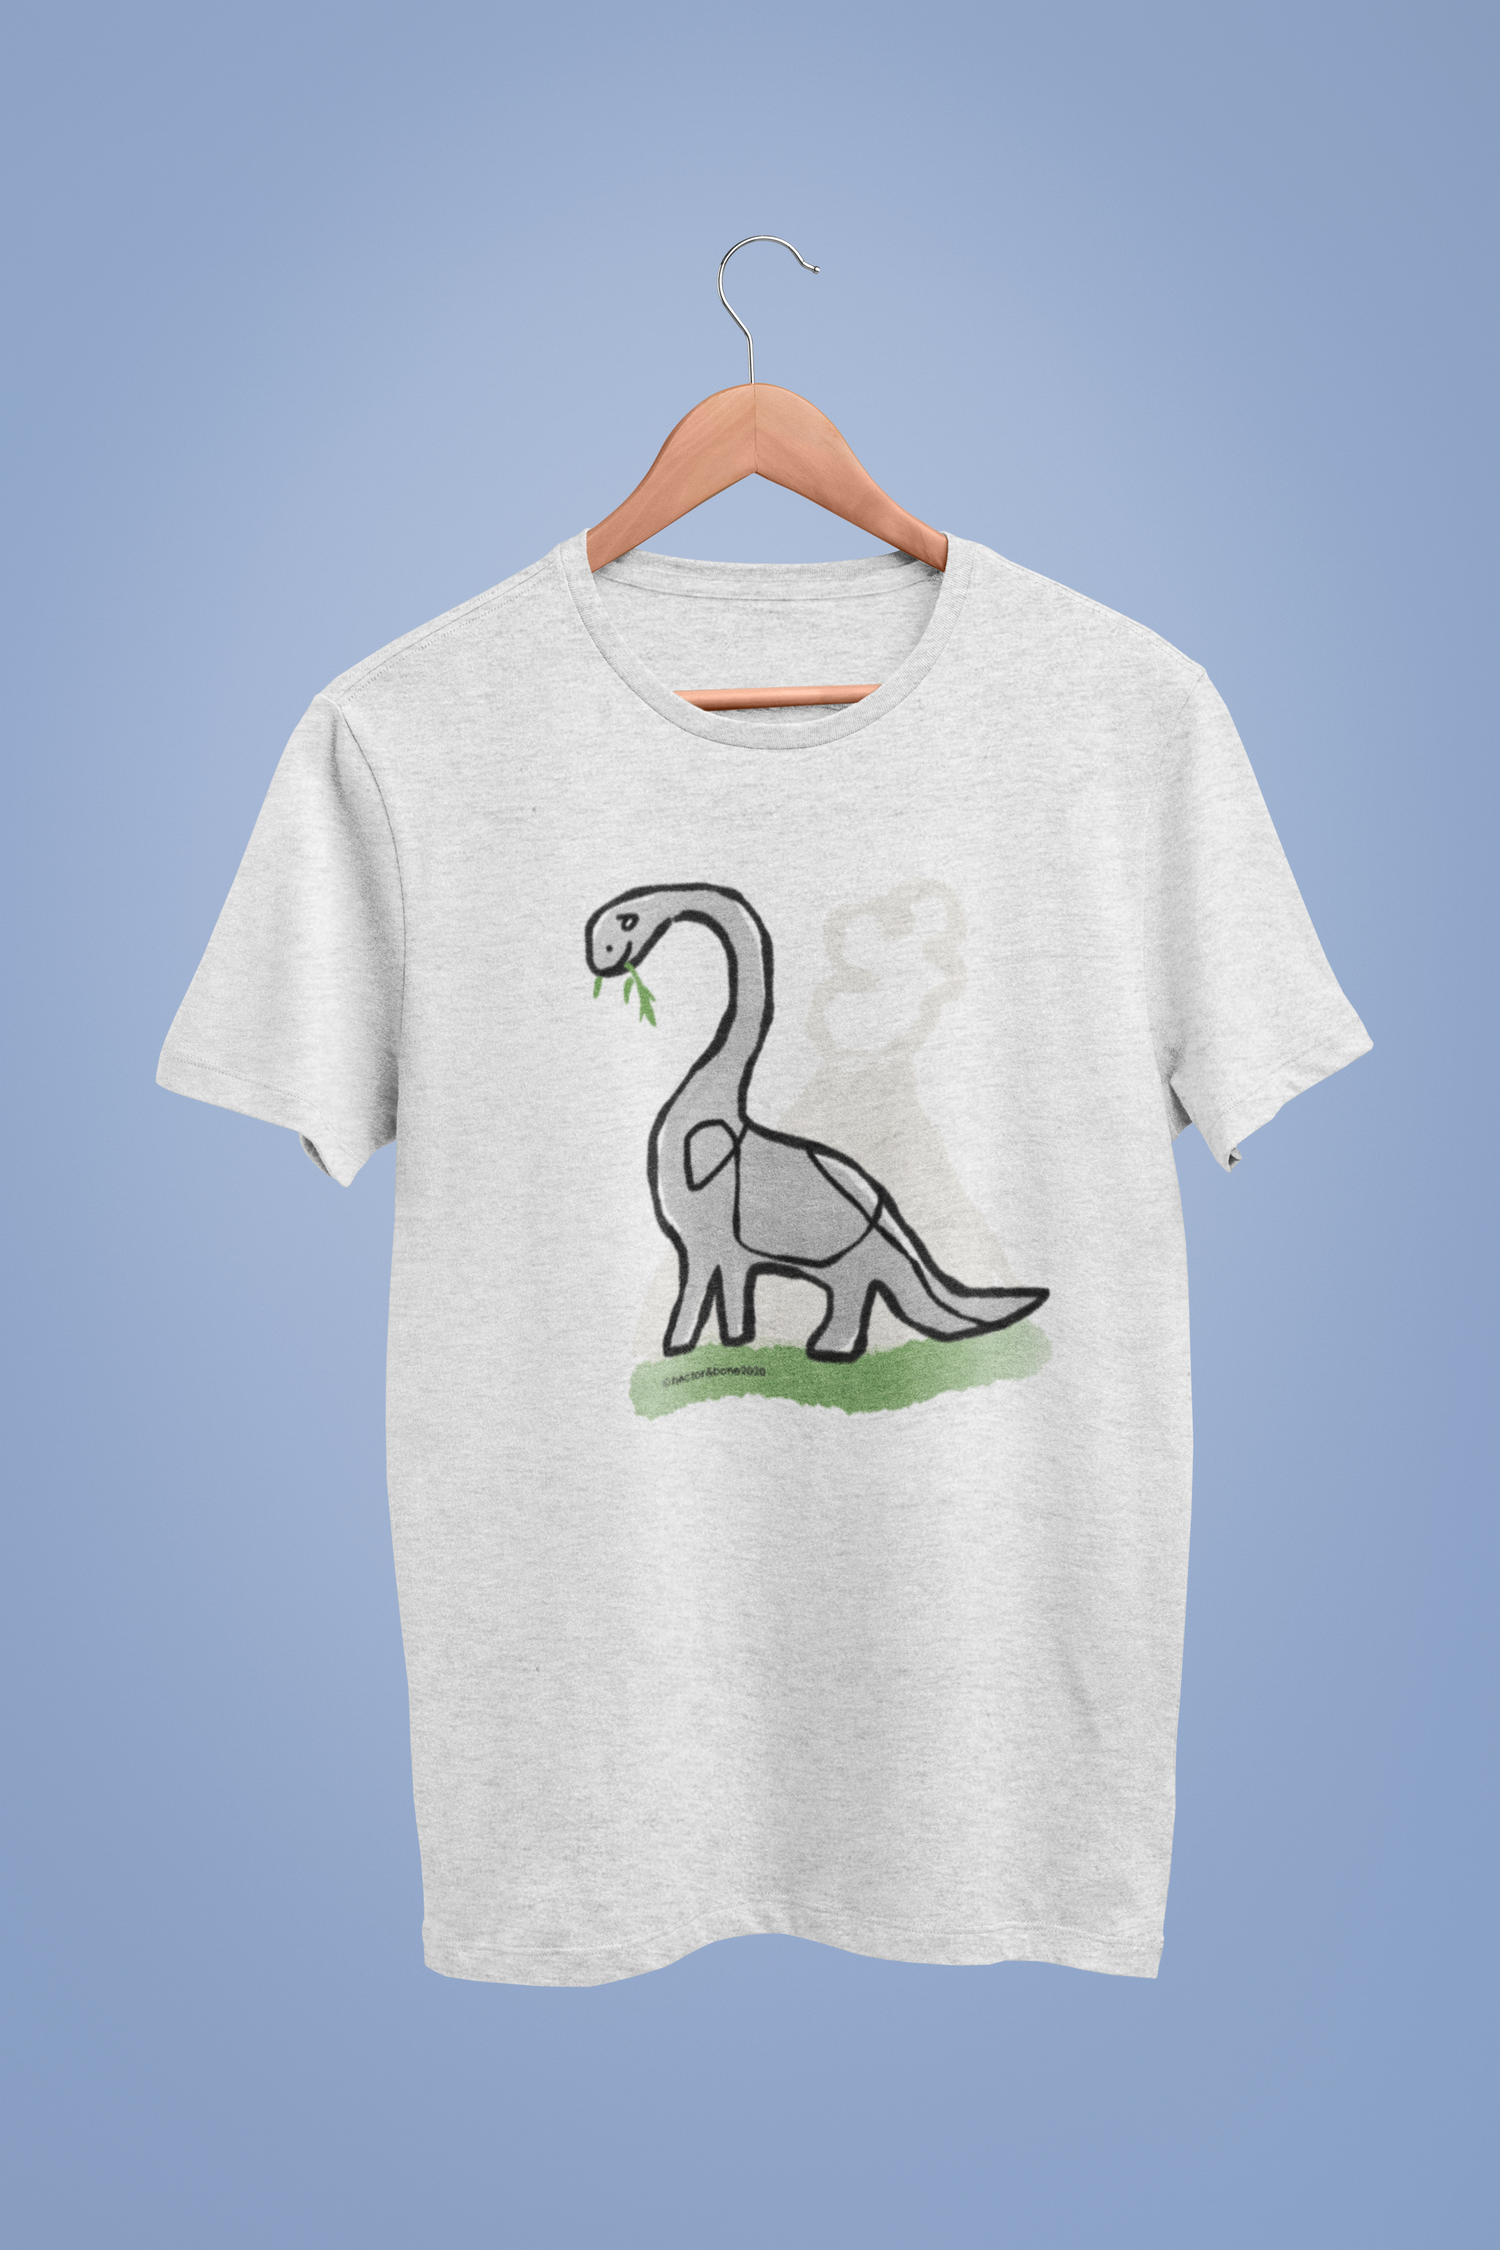 A cute derek dinosaur illustrated design by hector and bone on a heather t-shirt